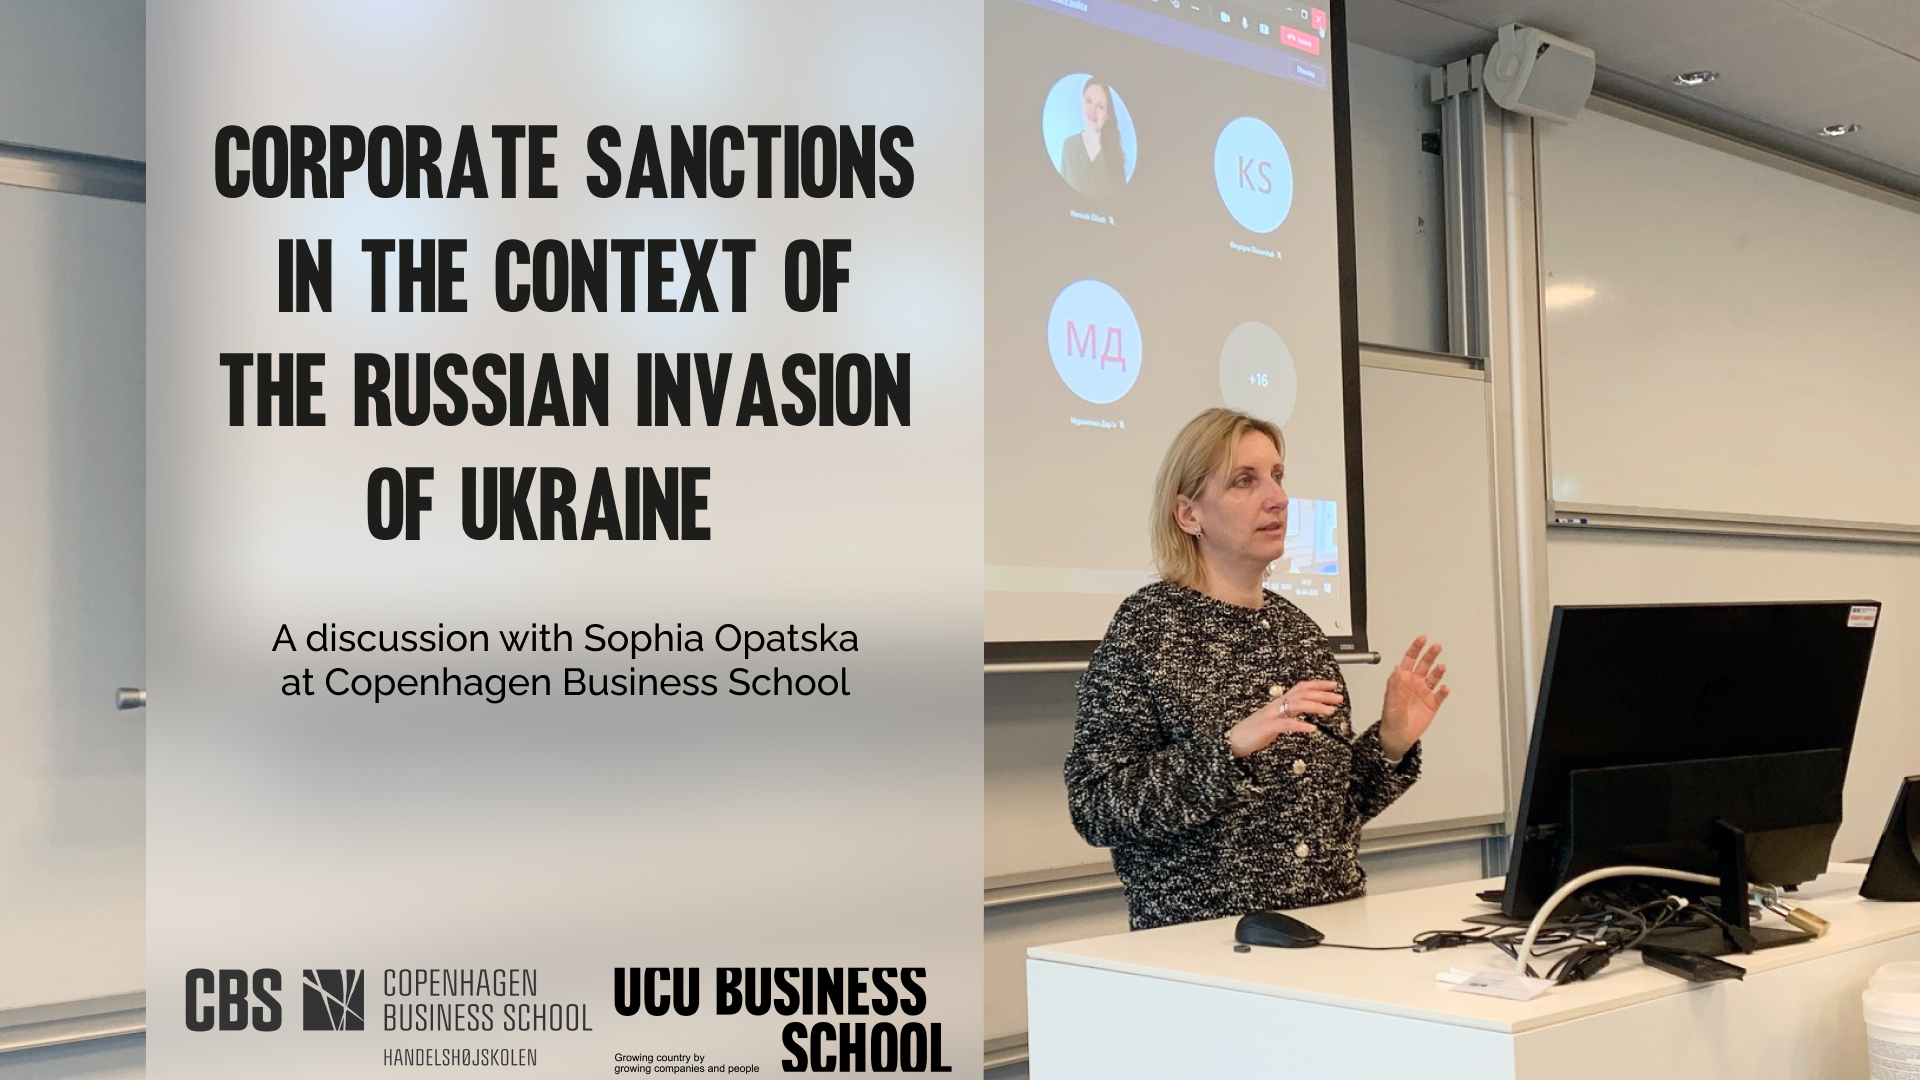 Corporate sanctions in the context of the Russian invasion of Ukraine